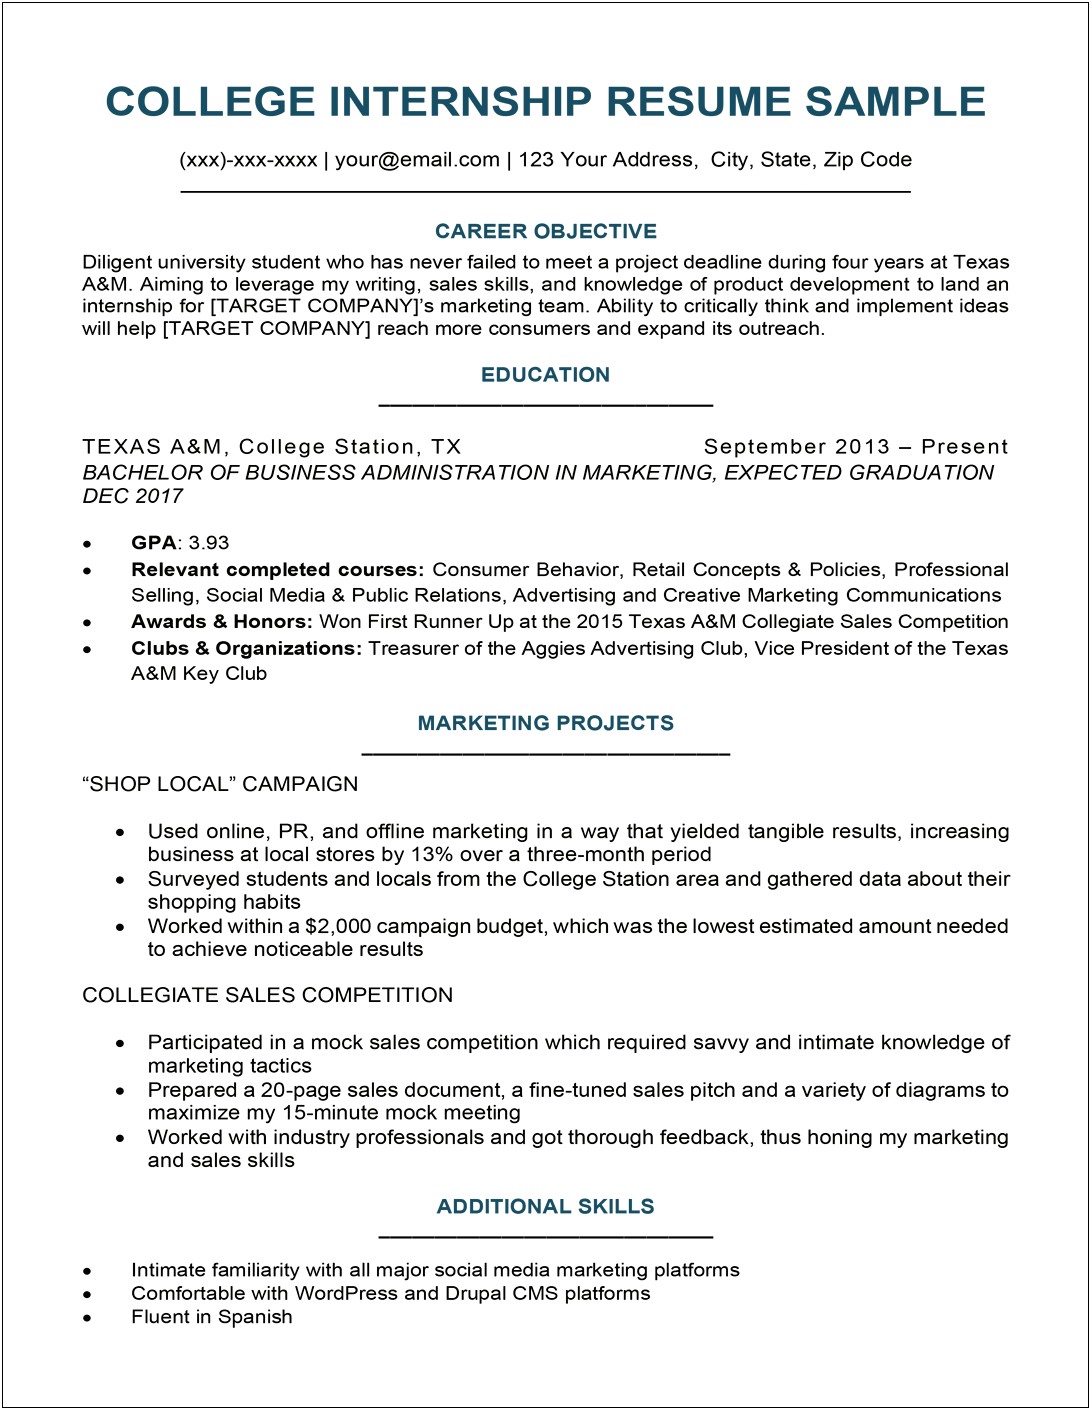 Resume Samples Of College Students